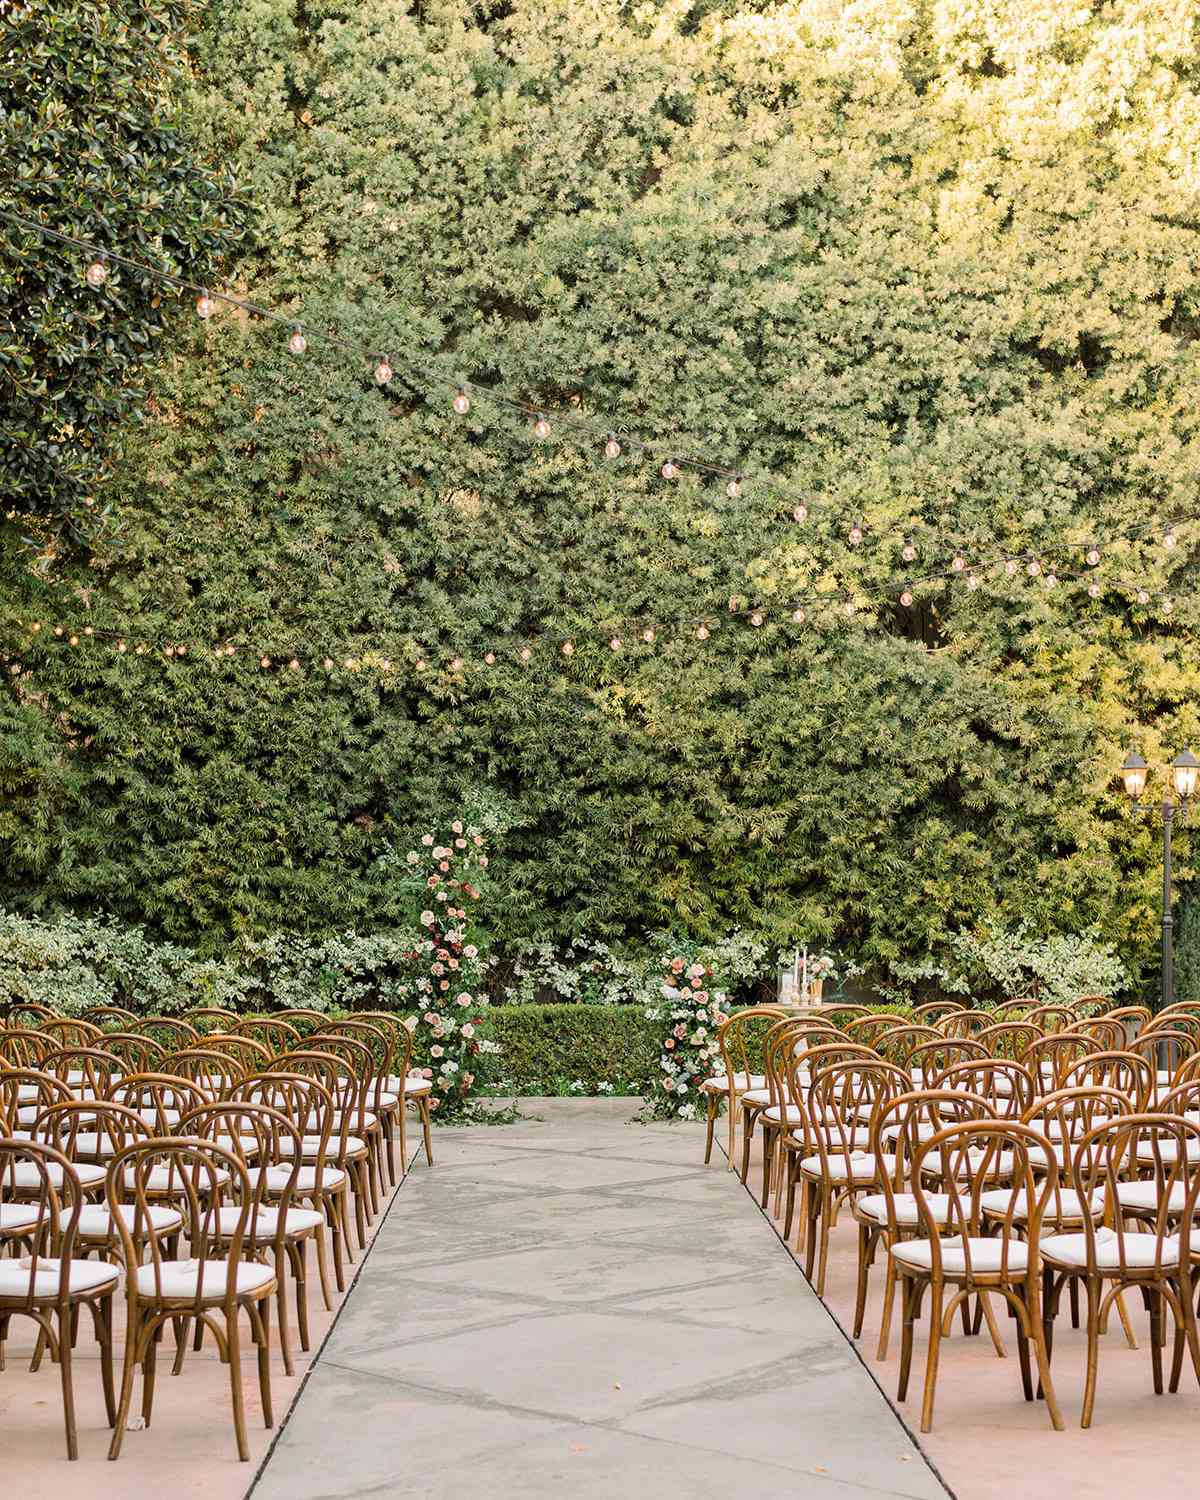 outdoor ceremony location with greenery wall and wooden chairs